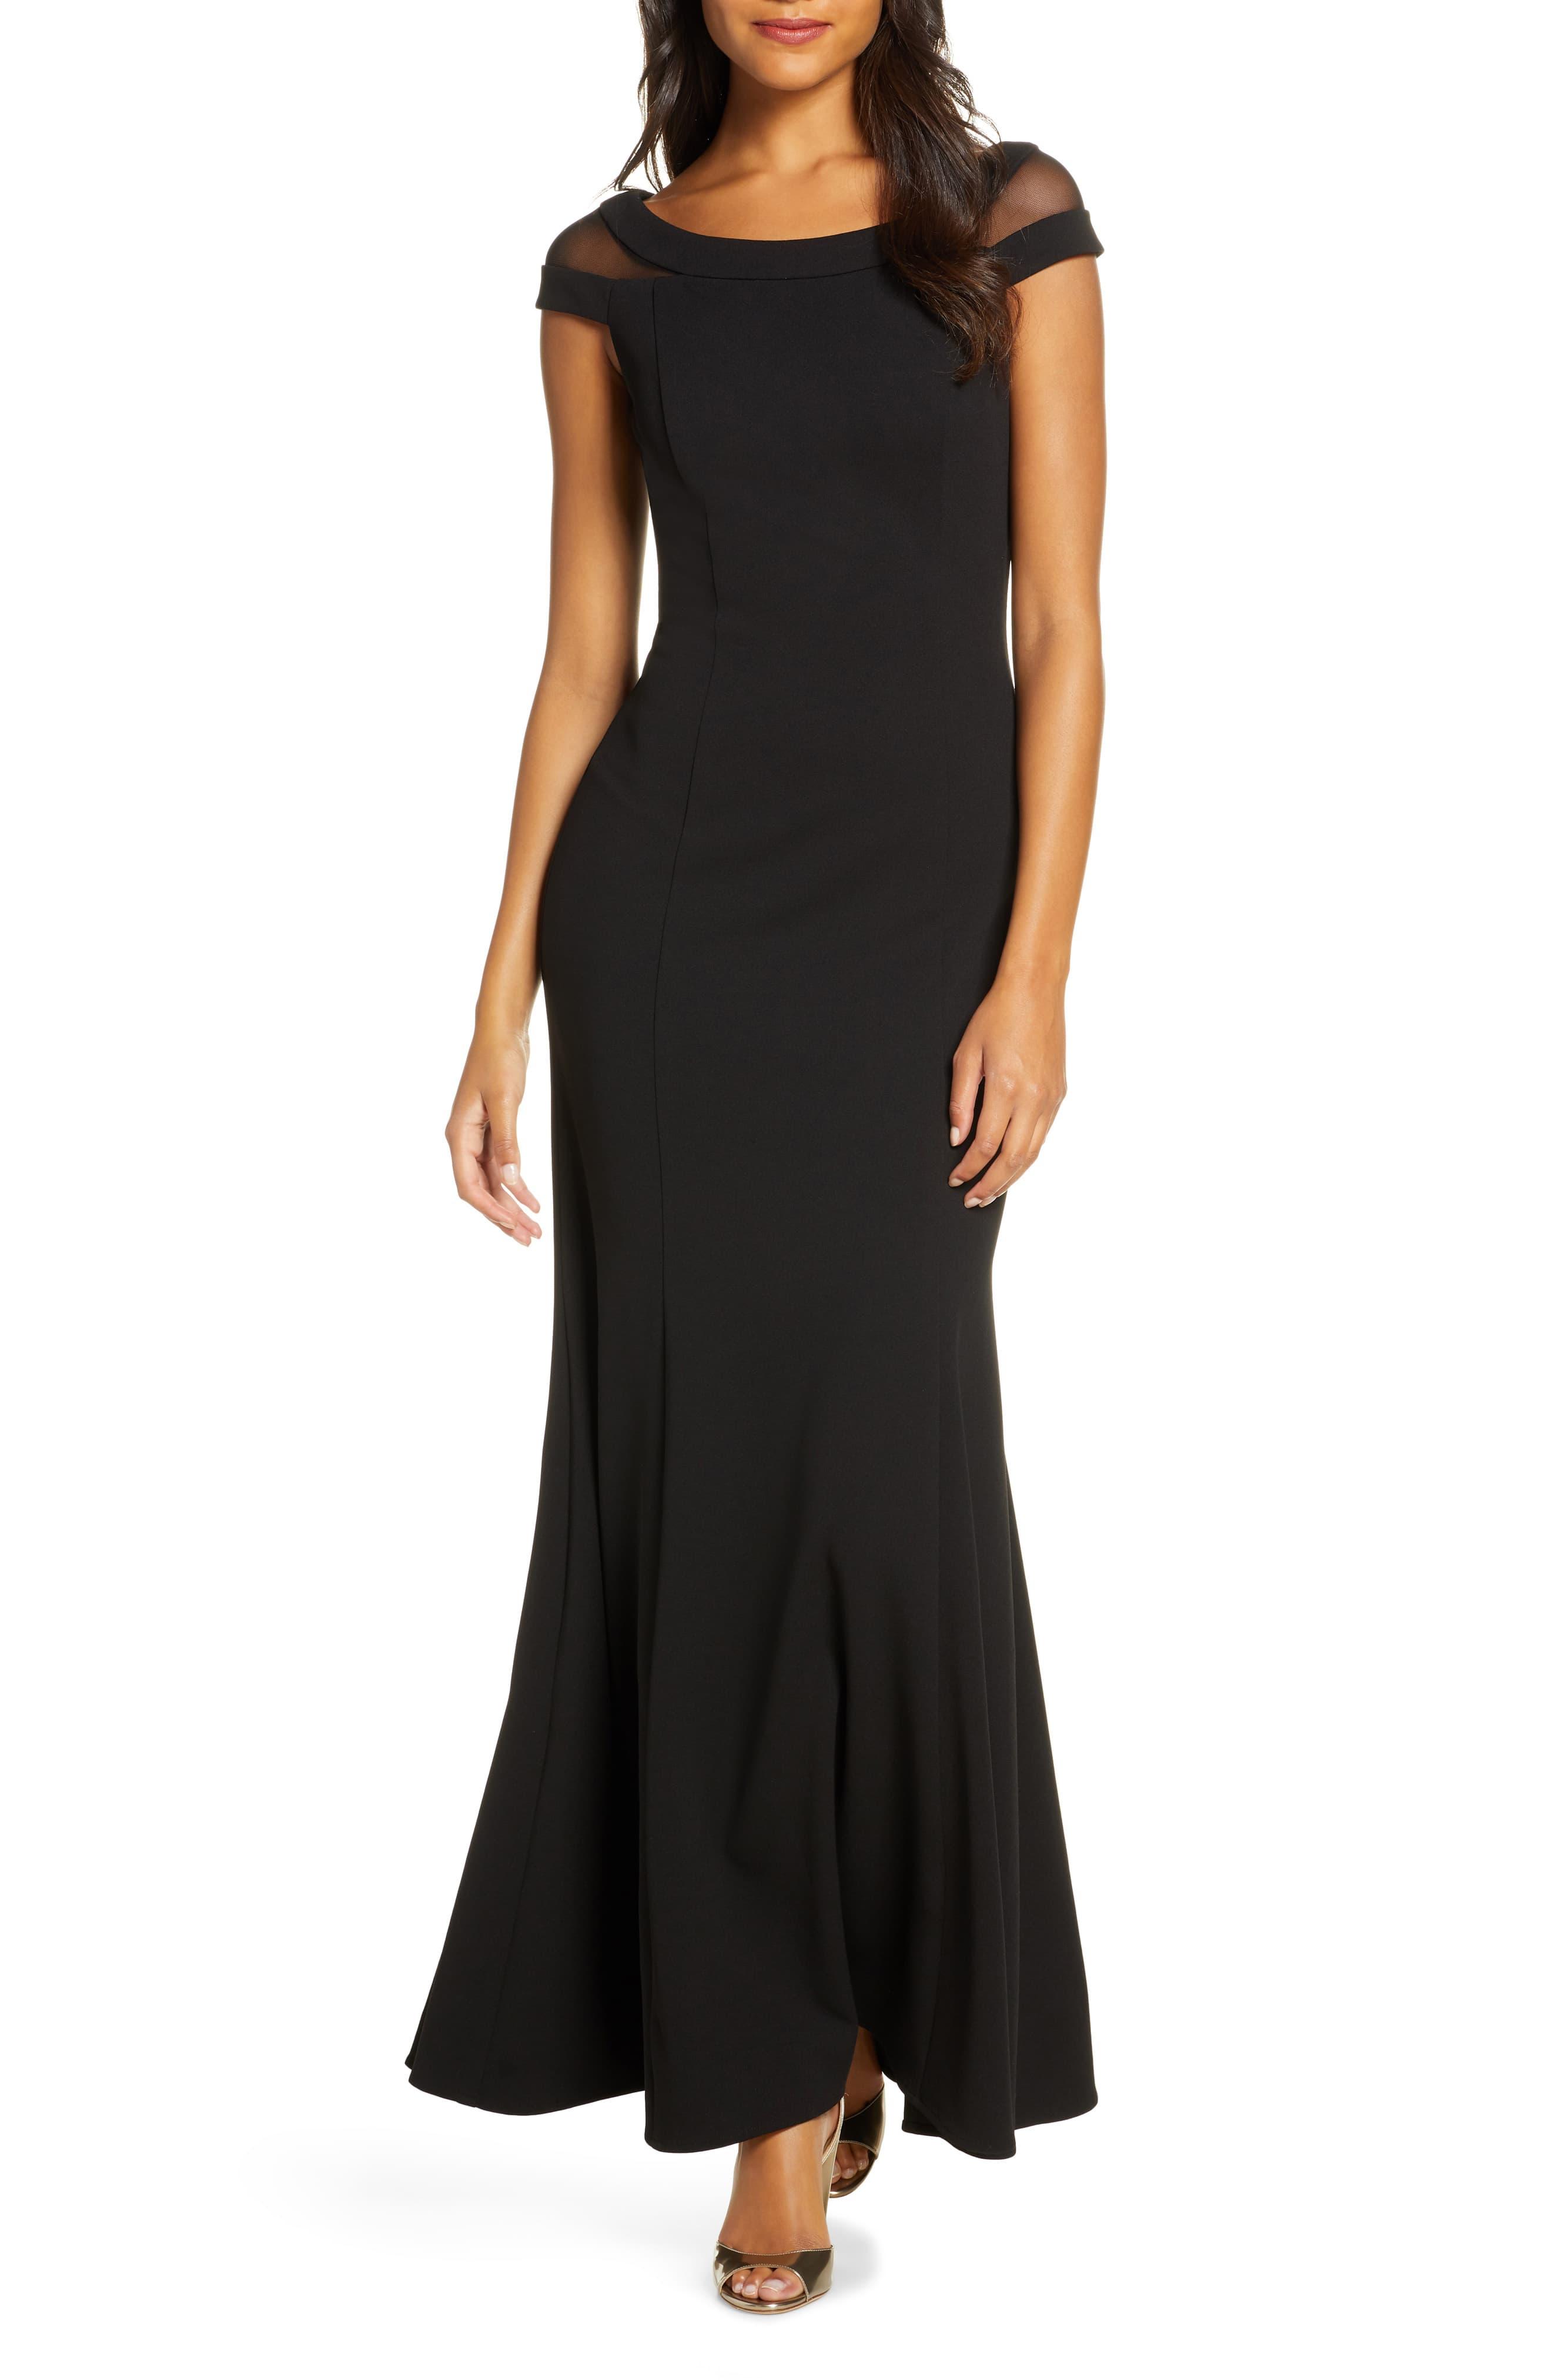 Vince Camuto Boat Neck Evening Gown in Black - Lyst